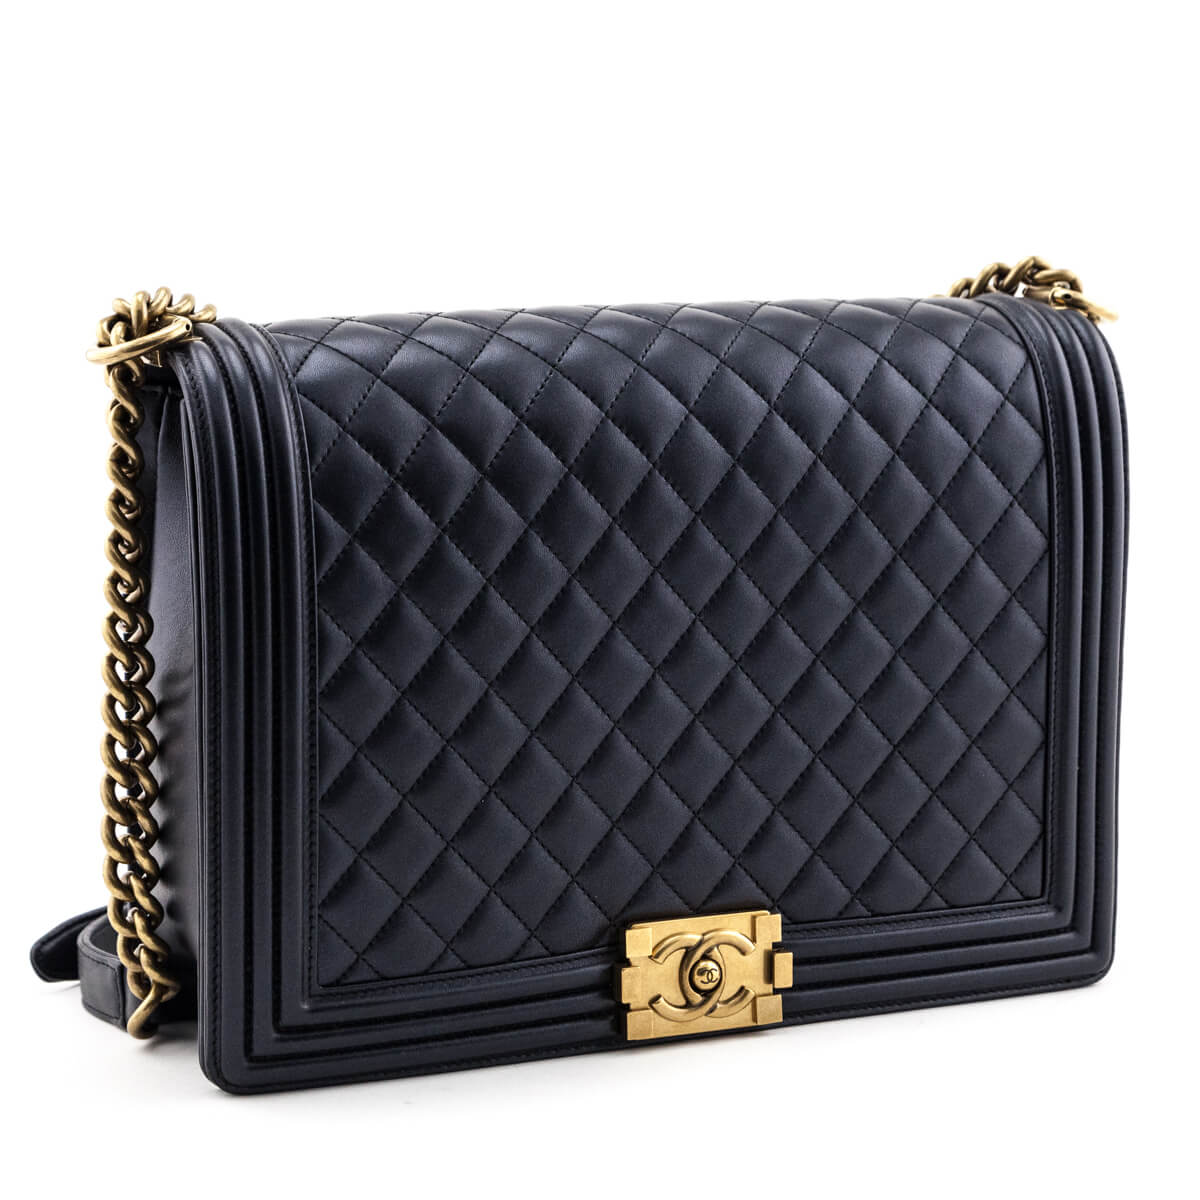 CHANEL Leather Bags & Handbags for Women | Authenticity Guaranteed | eBay